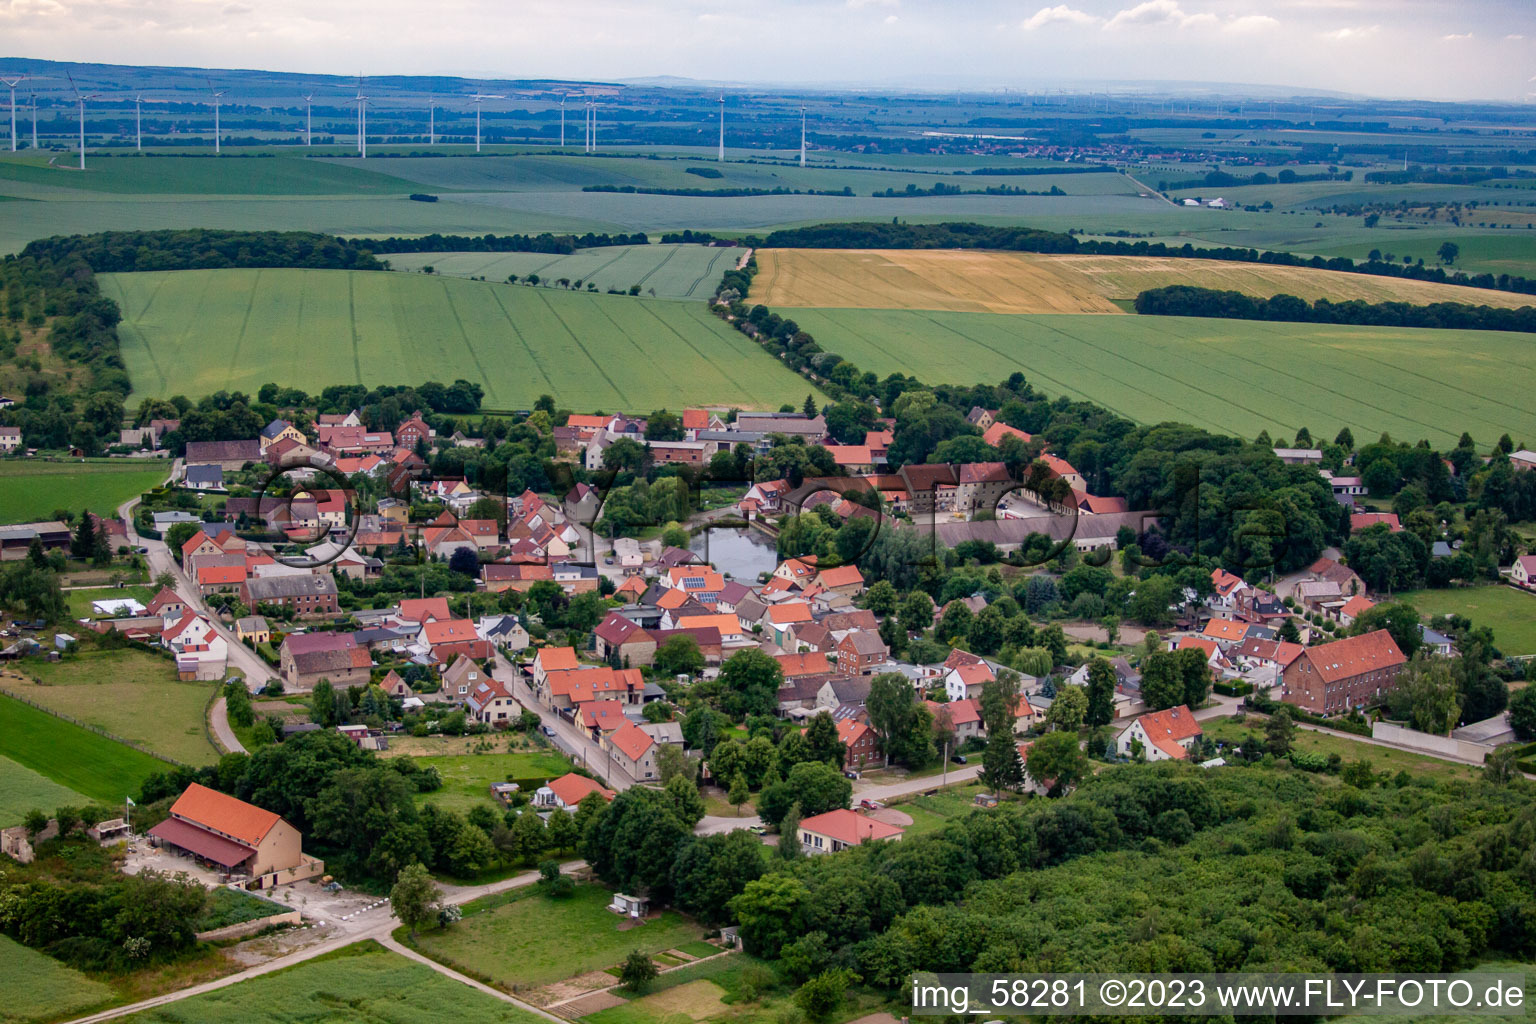 Village - view on the edge of agricultural fields and farmland in Heteborn in the state Saxony-Anhalt, Germany